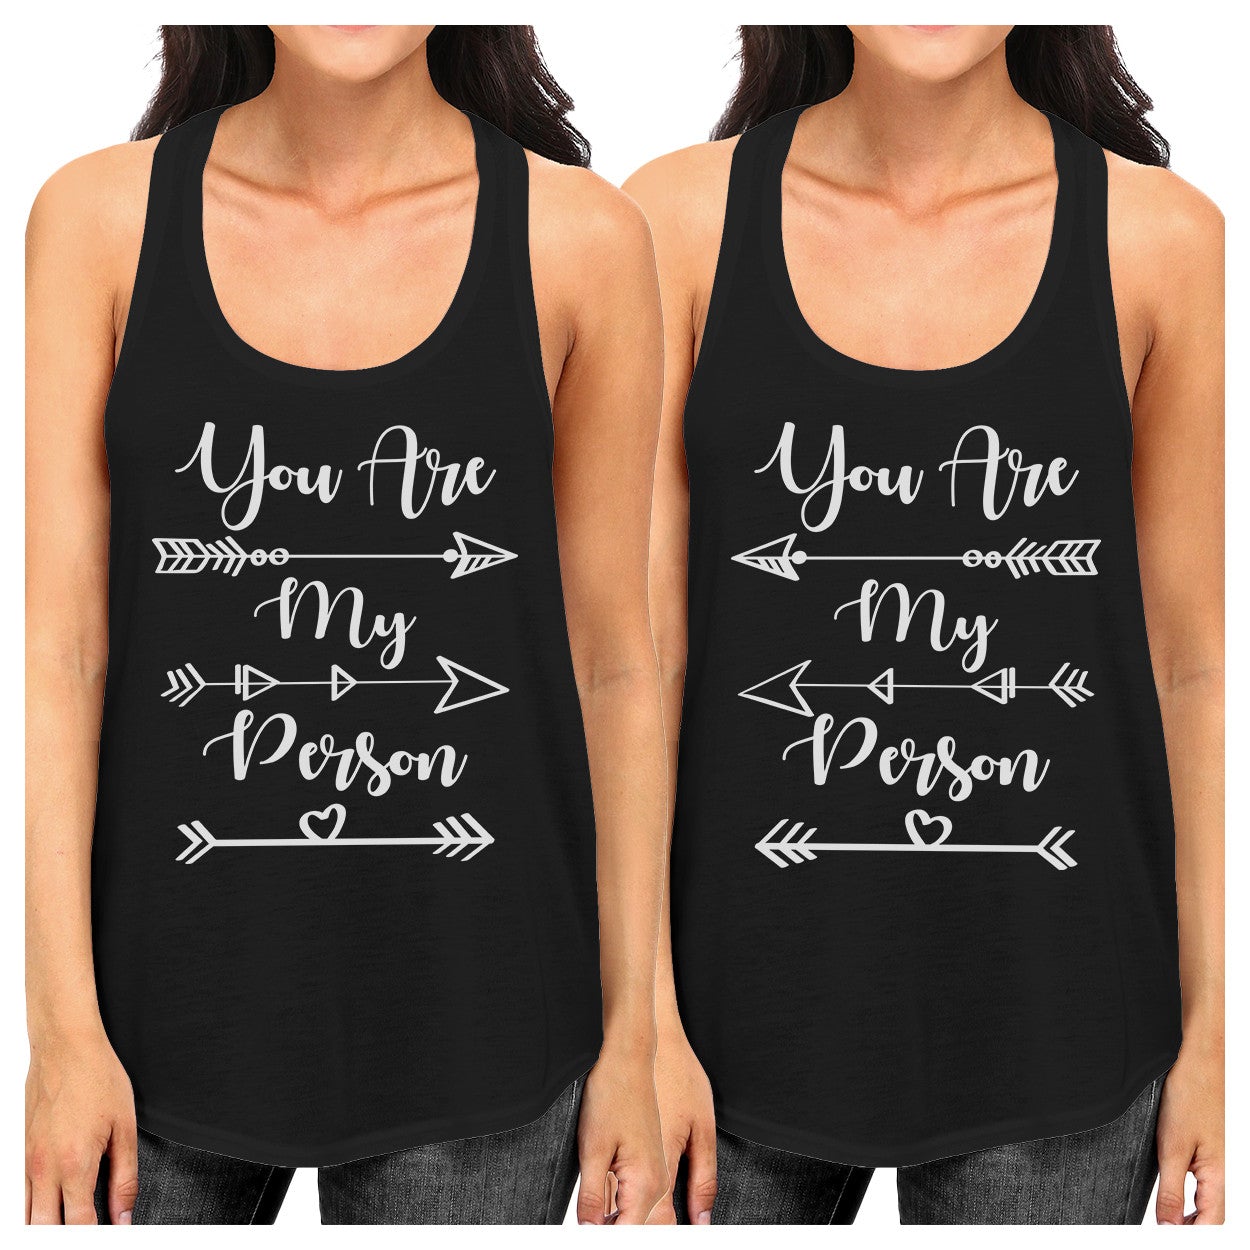 You Are My Person BFF Matching Black Tank Tops